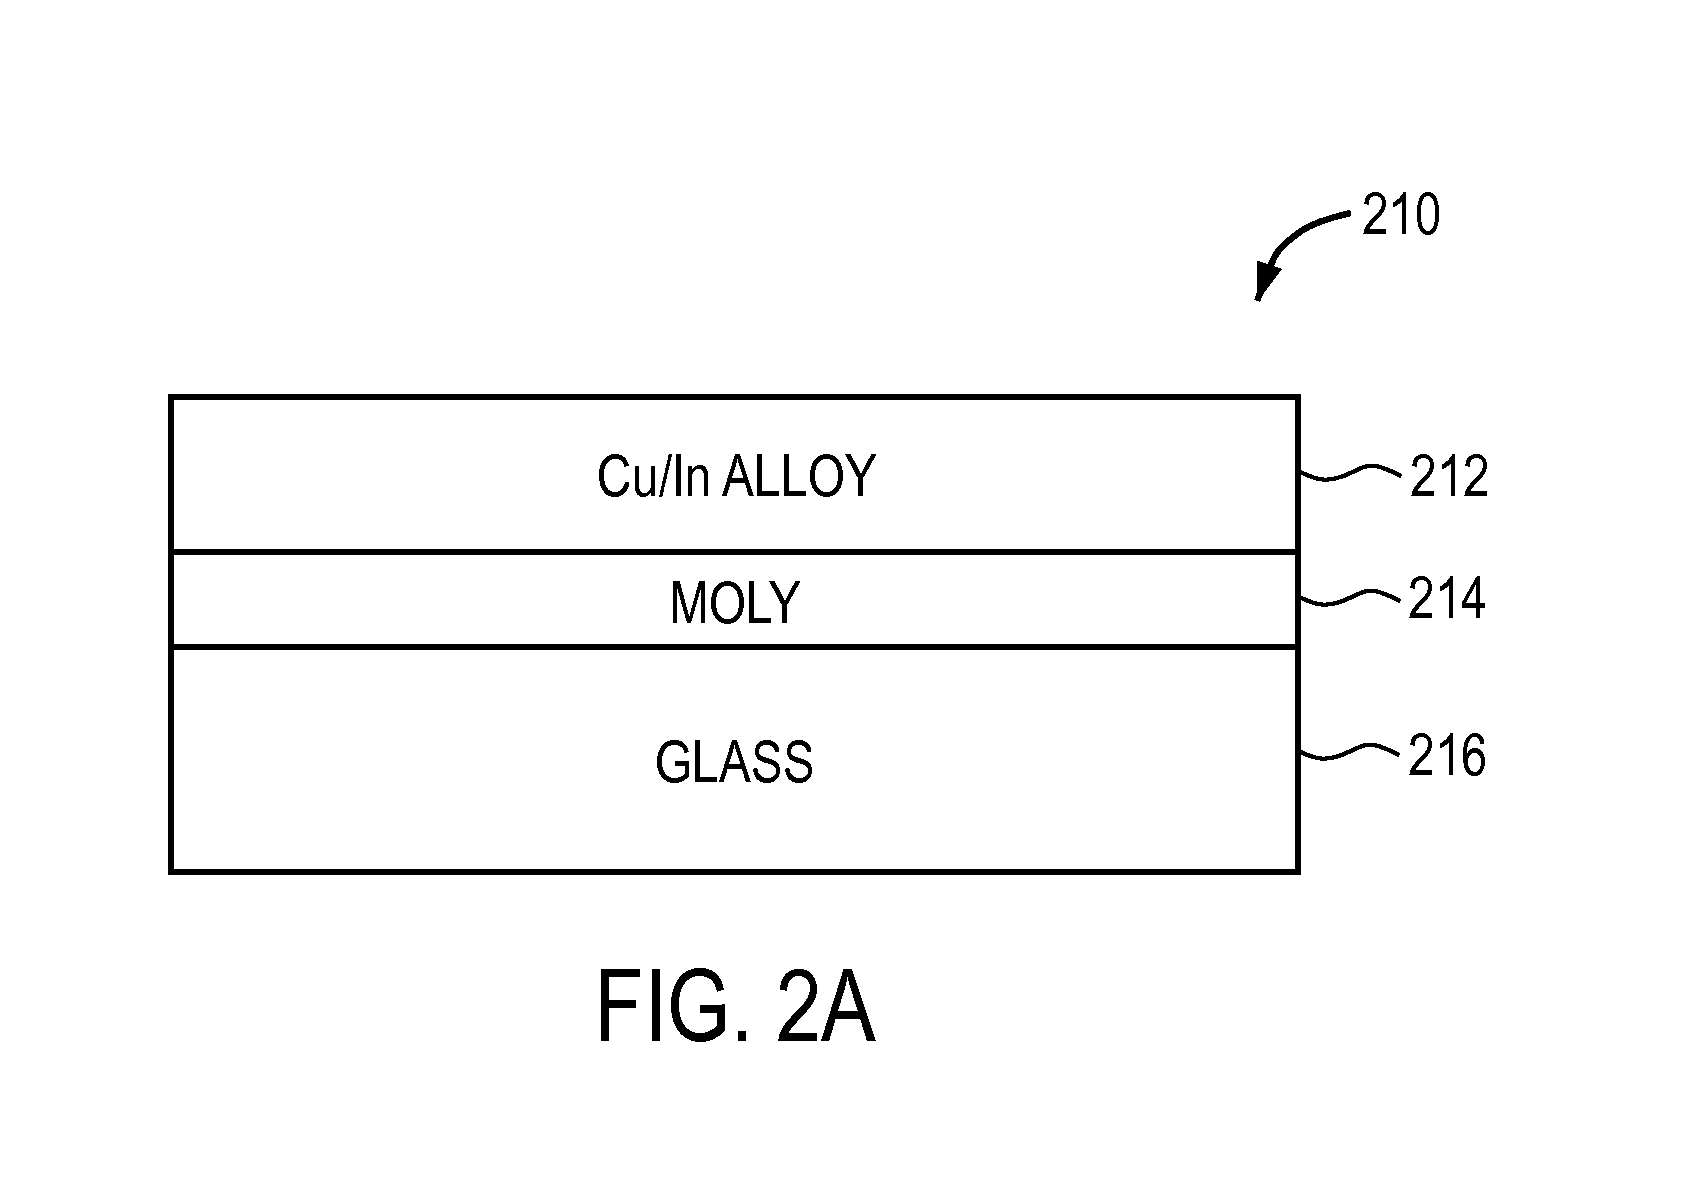 System and Method for Transferring Substrates in Large Scale Processing of CIGS and/or CIS Devices